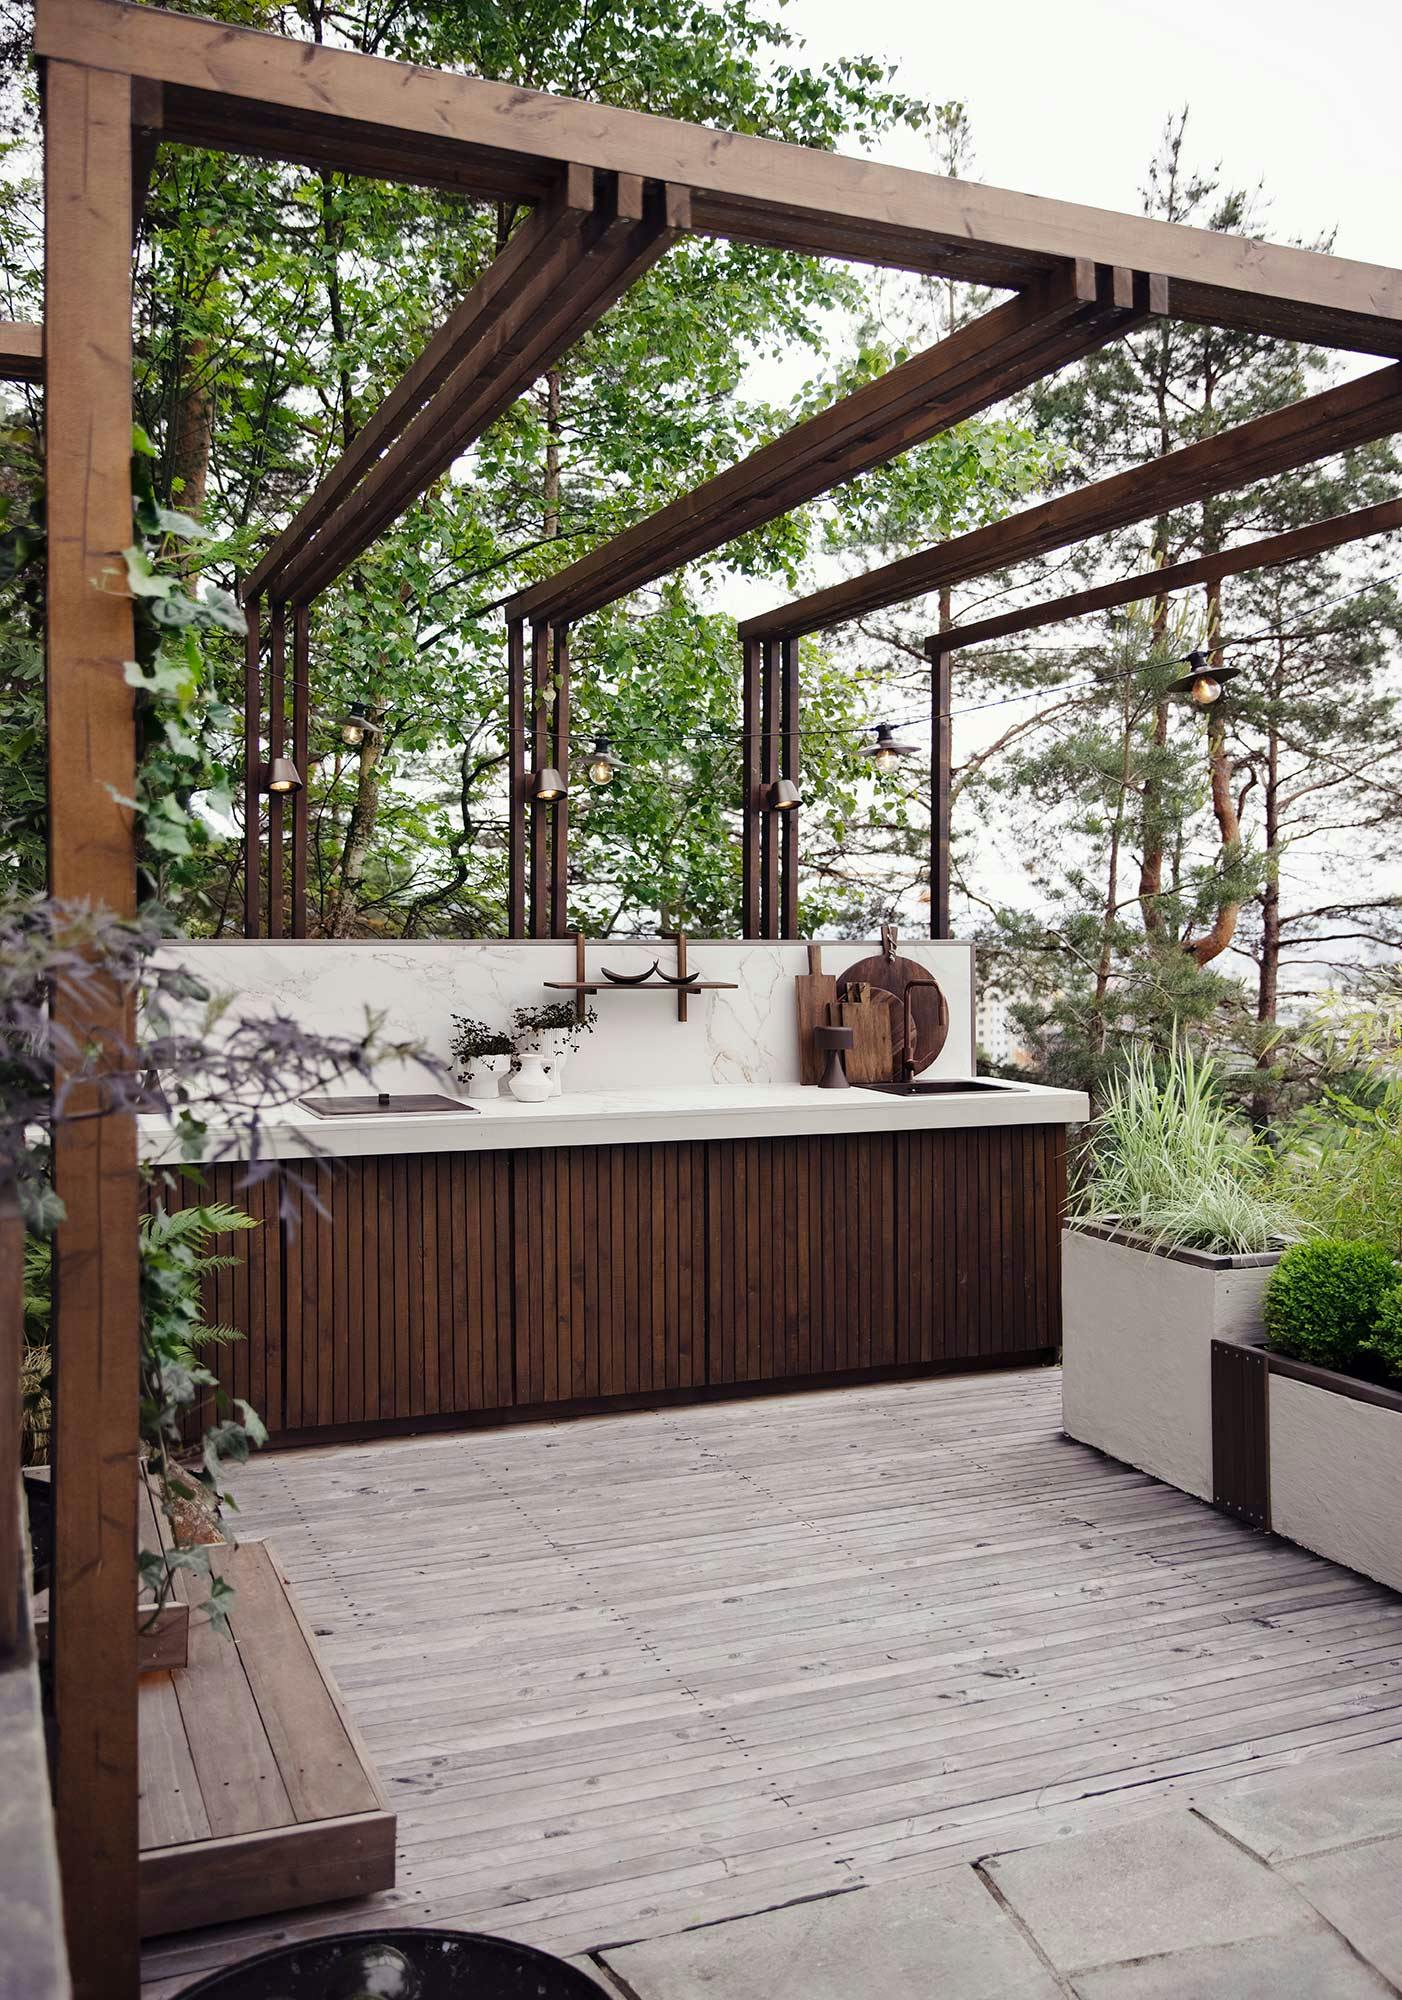 Numéro d'image 34 de la section actuelle de DKTN is part of a lovely outdoor kitchen in Norway thanks to its exceptional durability and resistance de Cosentino France